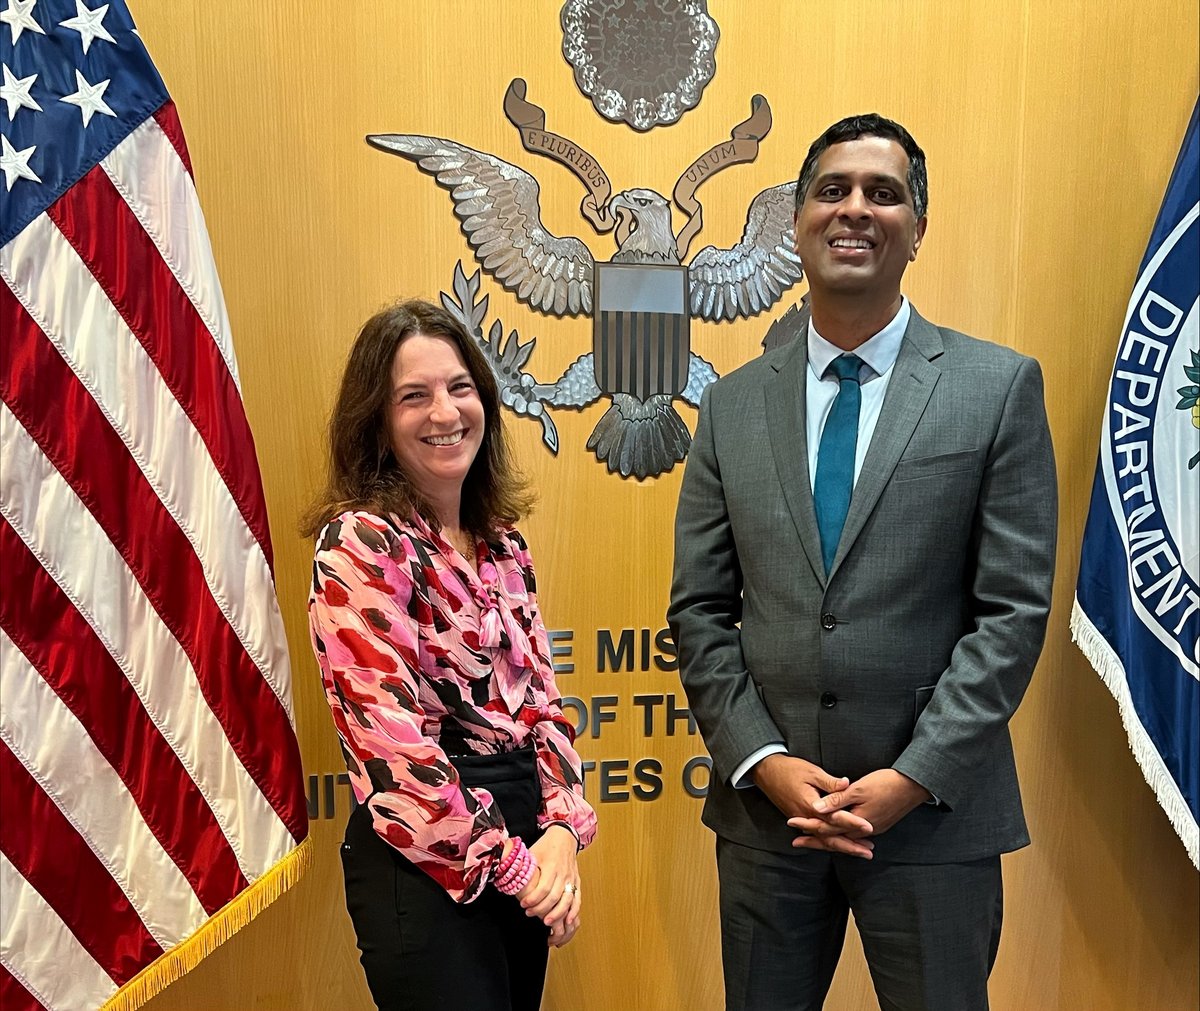 Pleased to welcome to #InternationalGeneva Dr. Gopal, Director of the National Cancer Institute (NCI) Center for Global Health. We discussed global engagement in cancer research, including support for @POTUS’ reignited #CancerMoonshot with its goal to #EndCancerAsWeKnowIt.